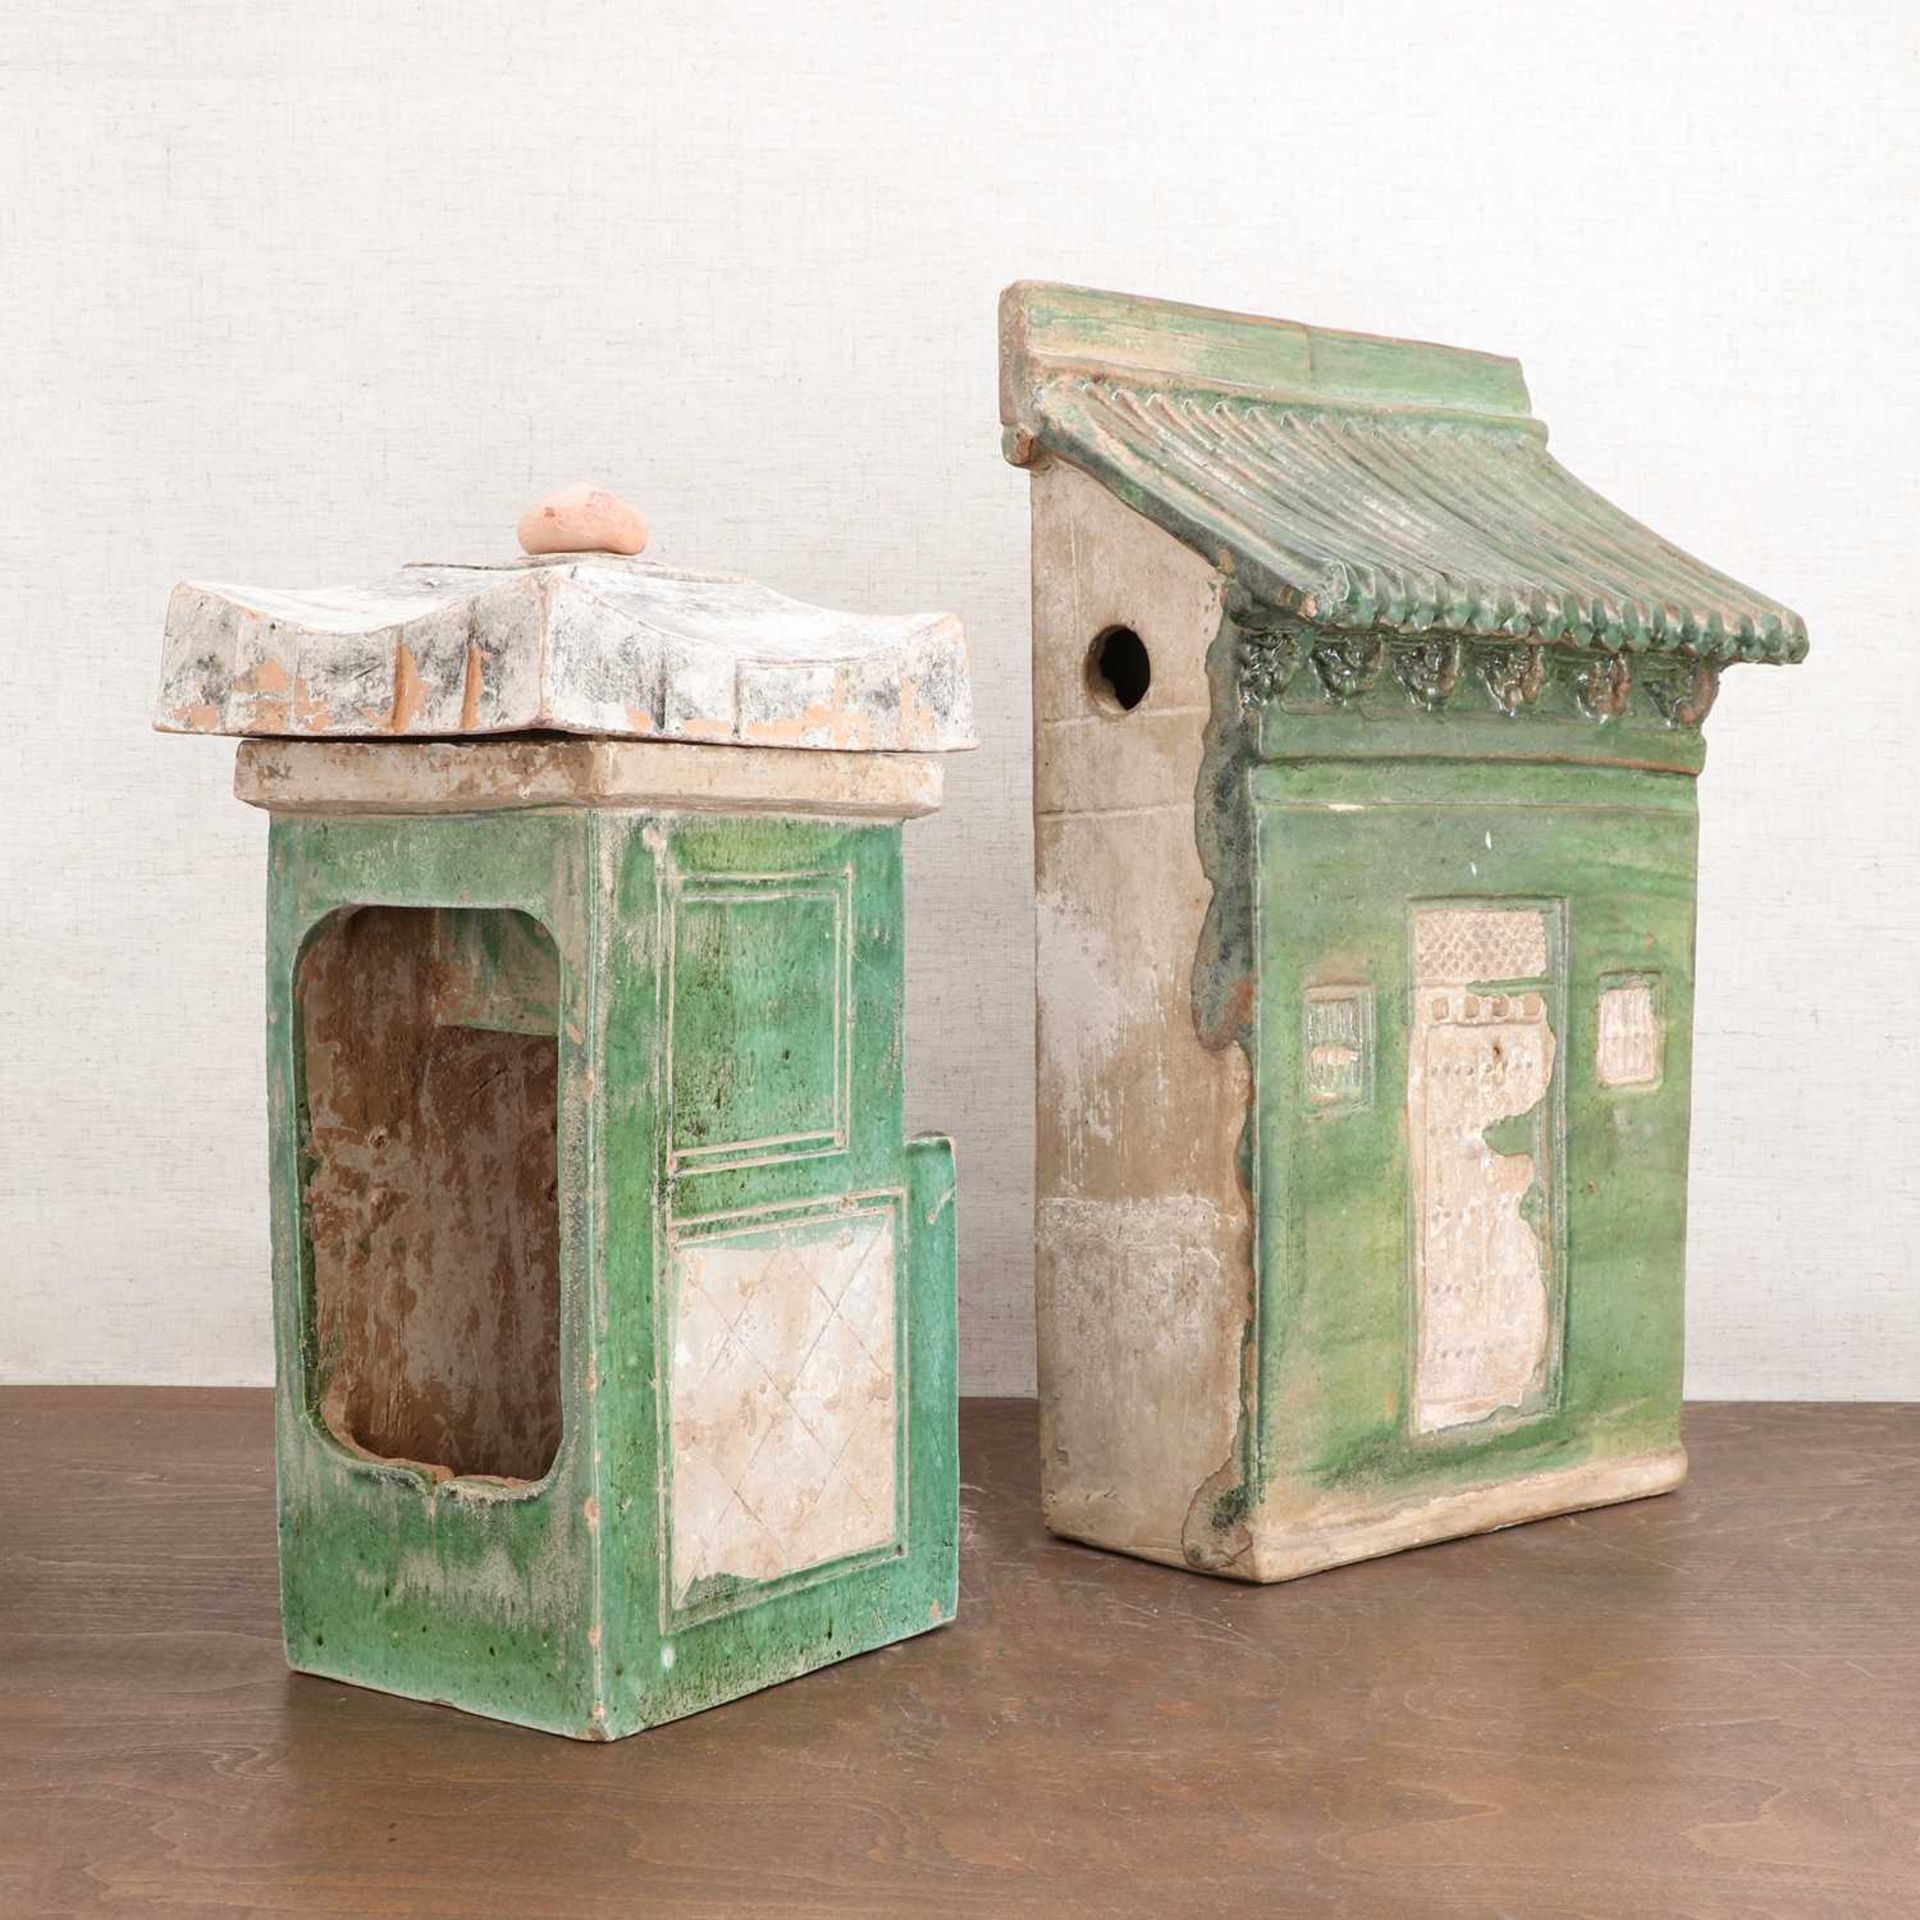 A Chinese earthenware model of a house, - Image 2 of 3